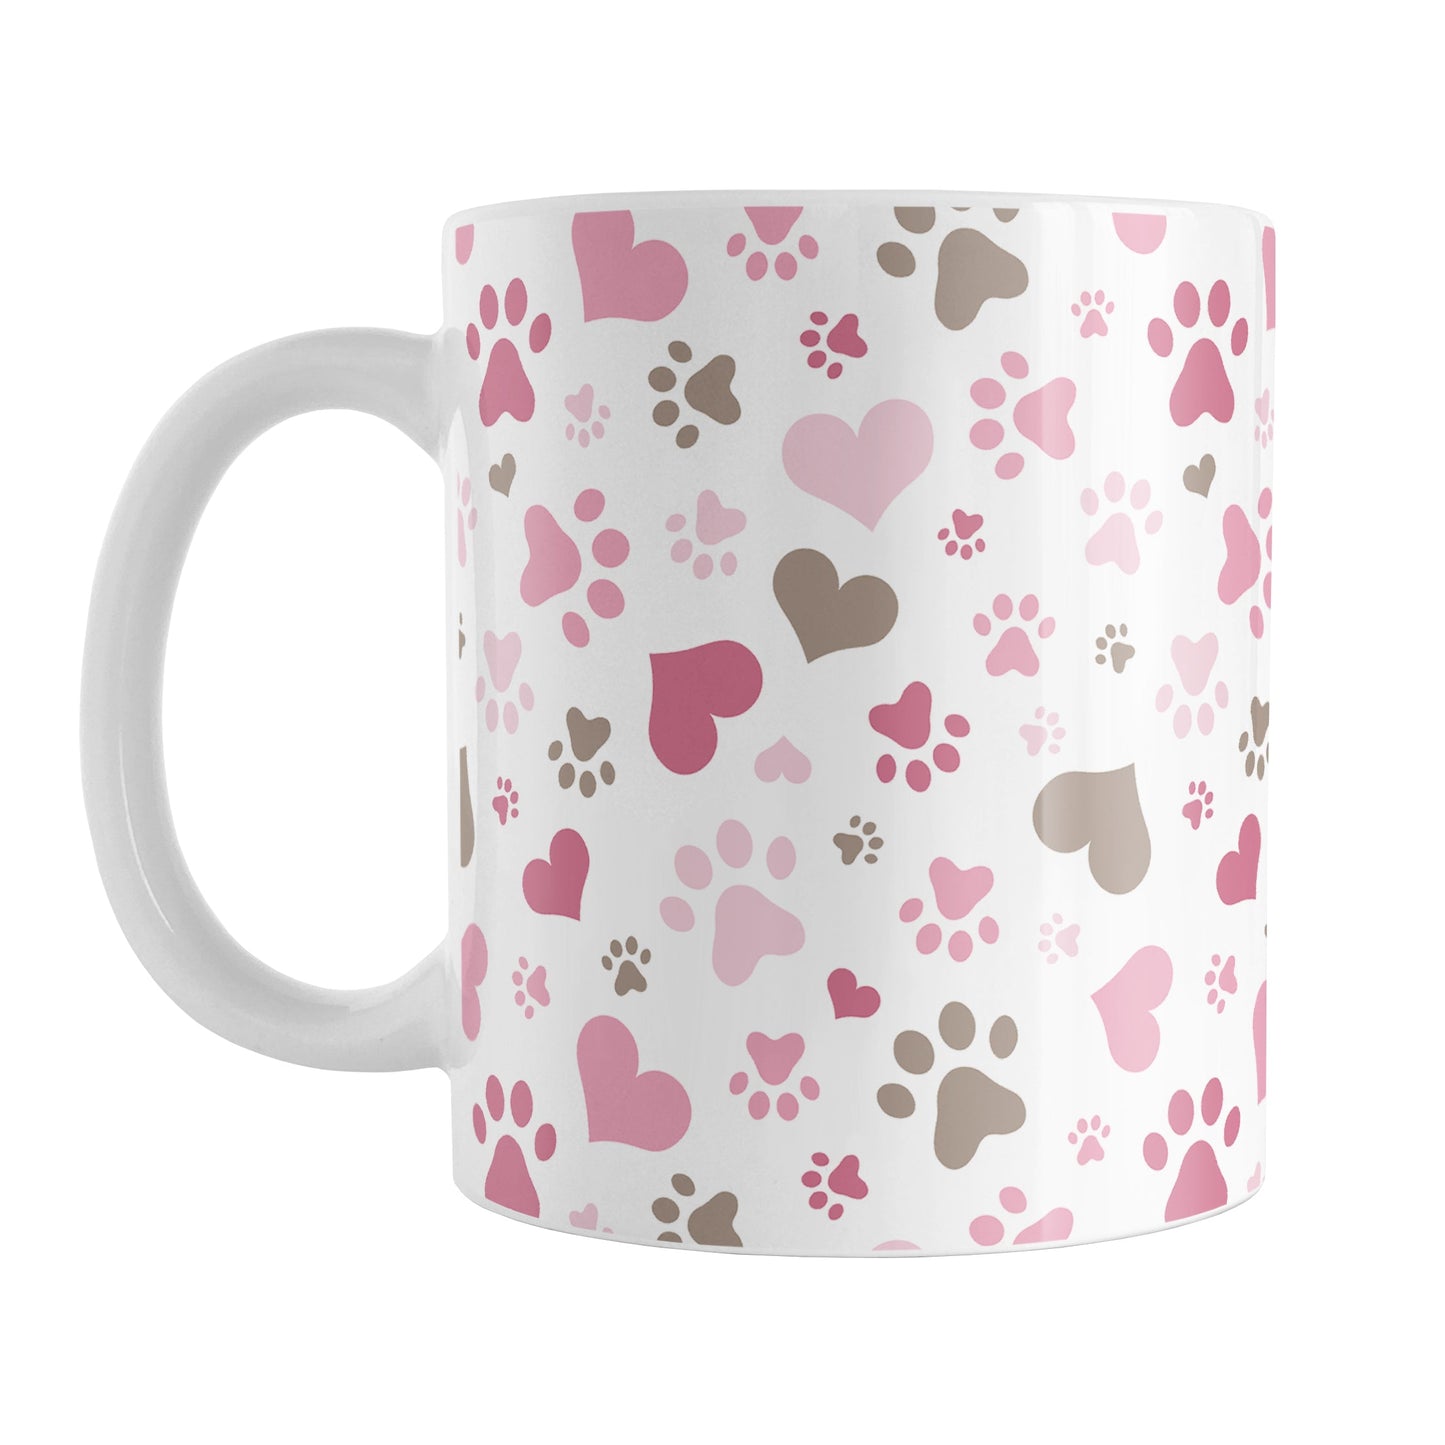 Pink Hearts and Paw Prints Mug (11oz) at Amy's Coffee Mugs. A ceramic coffee mug designed with a pattern of hearts and paw prints in brown and different shades of pink that wraps around the mug to the handle. This mug is perfect for people love dogs and cute paw print designs.